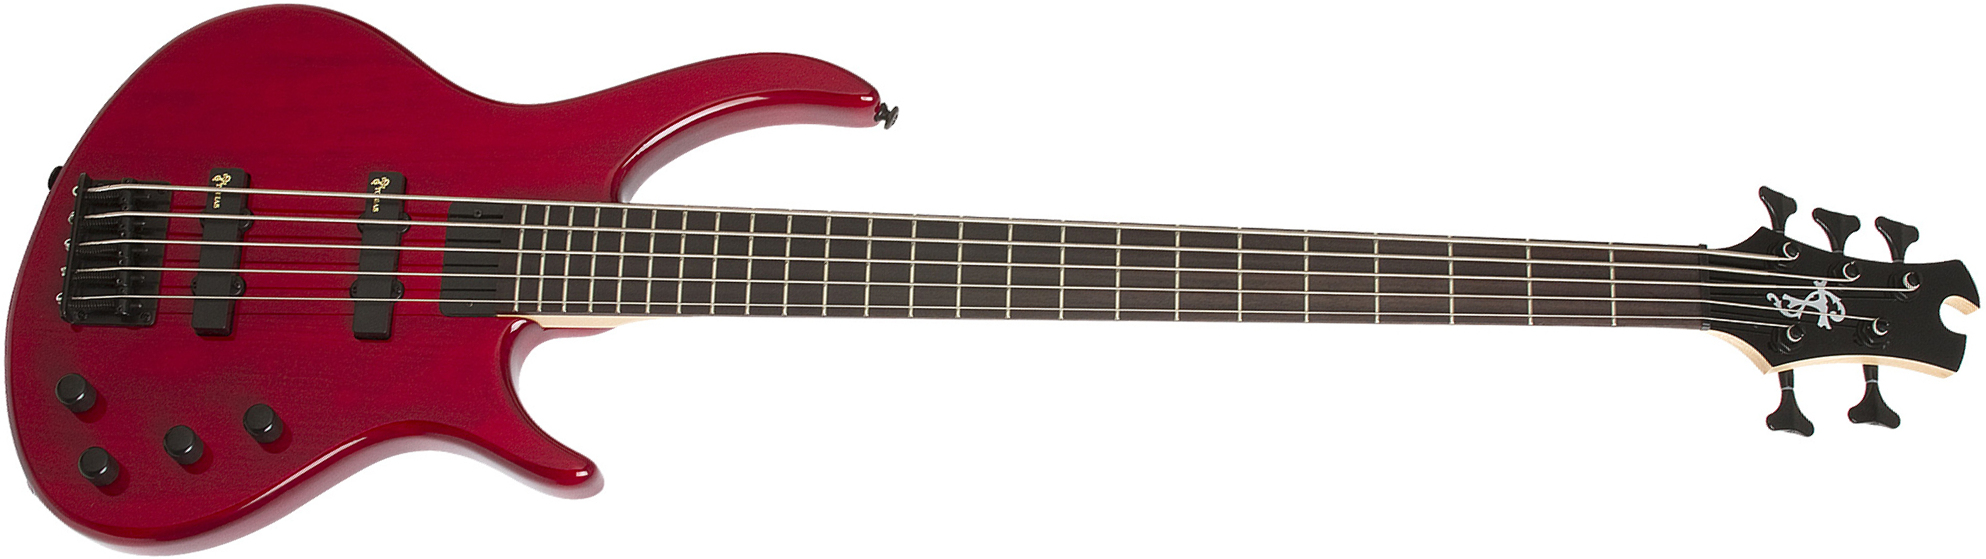 Epiphone Toby Deluxe V Bass Bh - Trans Red - Basse Électrique Solid Body - Main picture